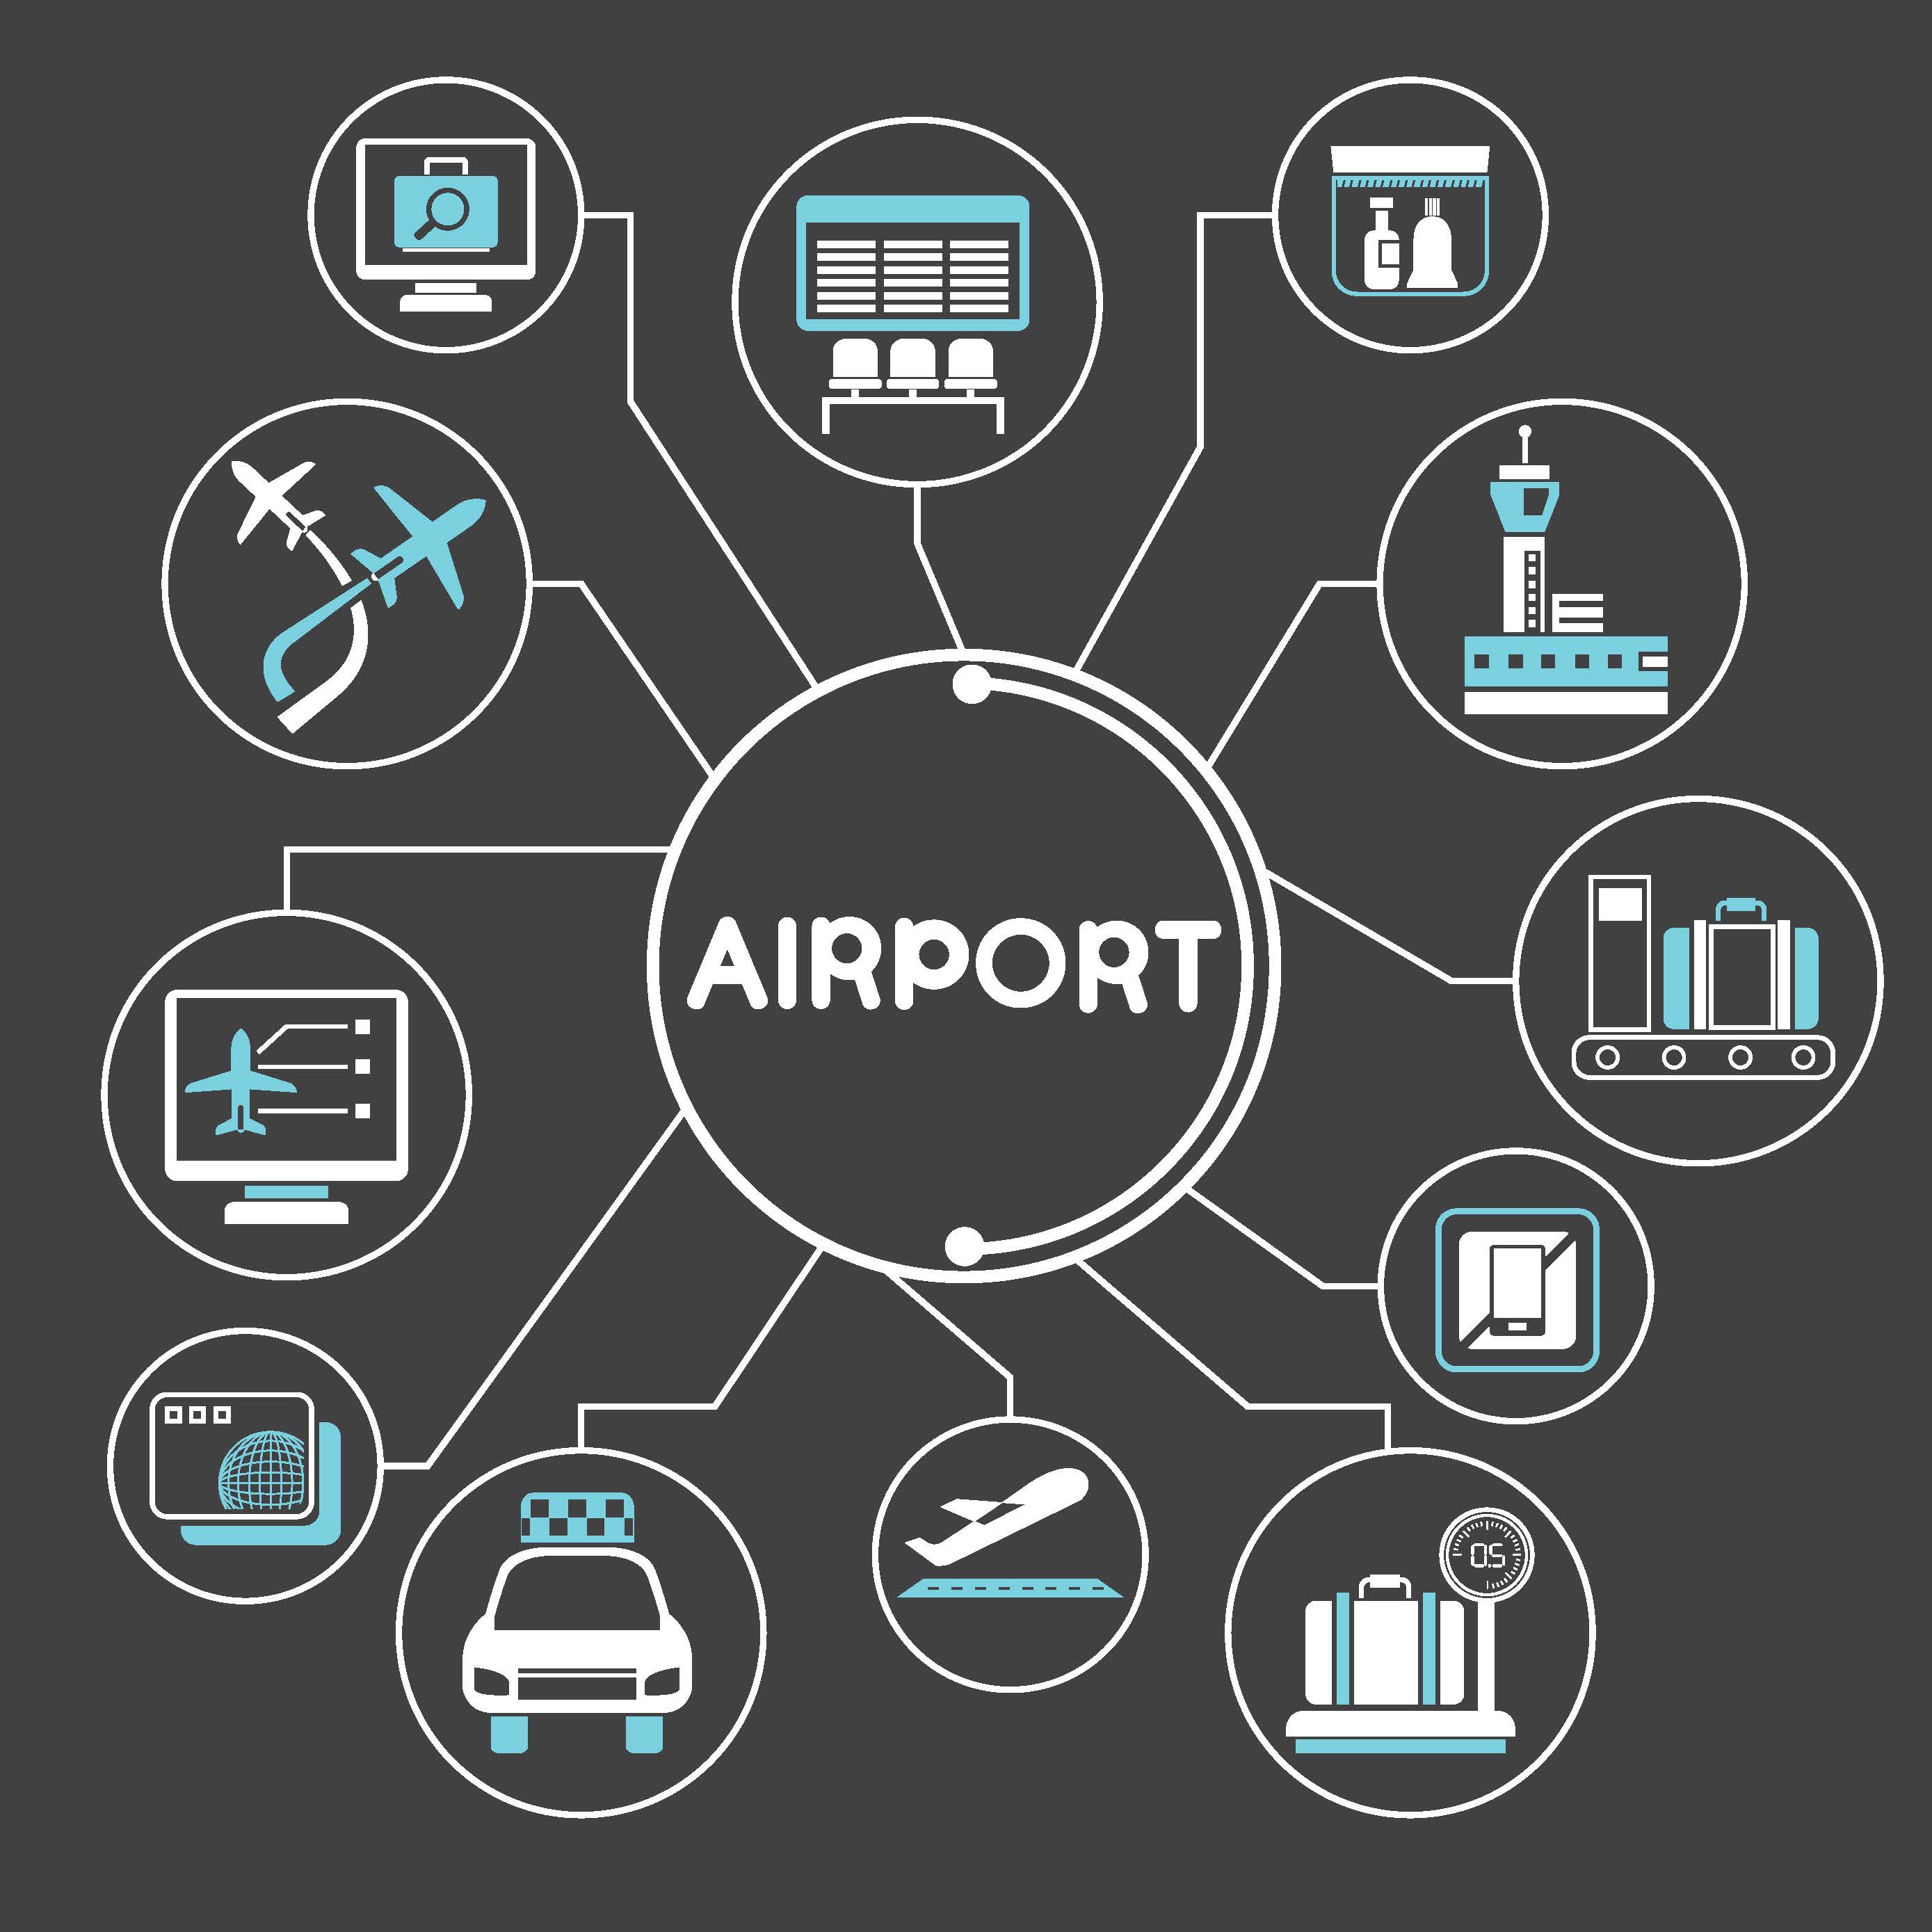 Analysis of Airports and Airlines Relationship